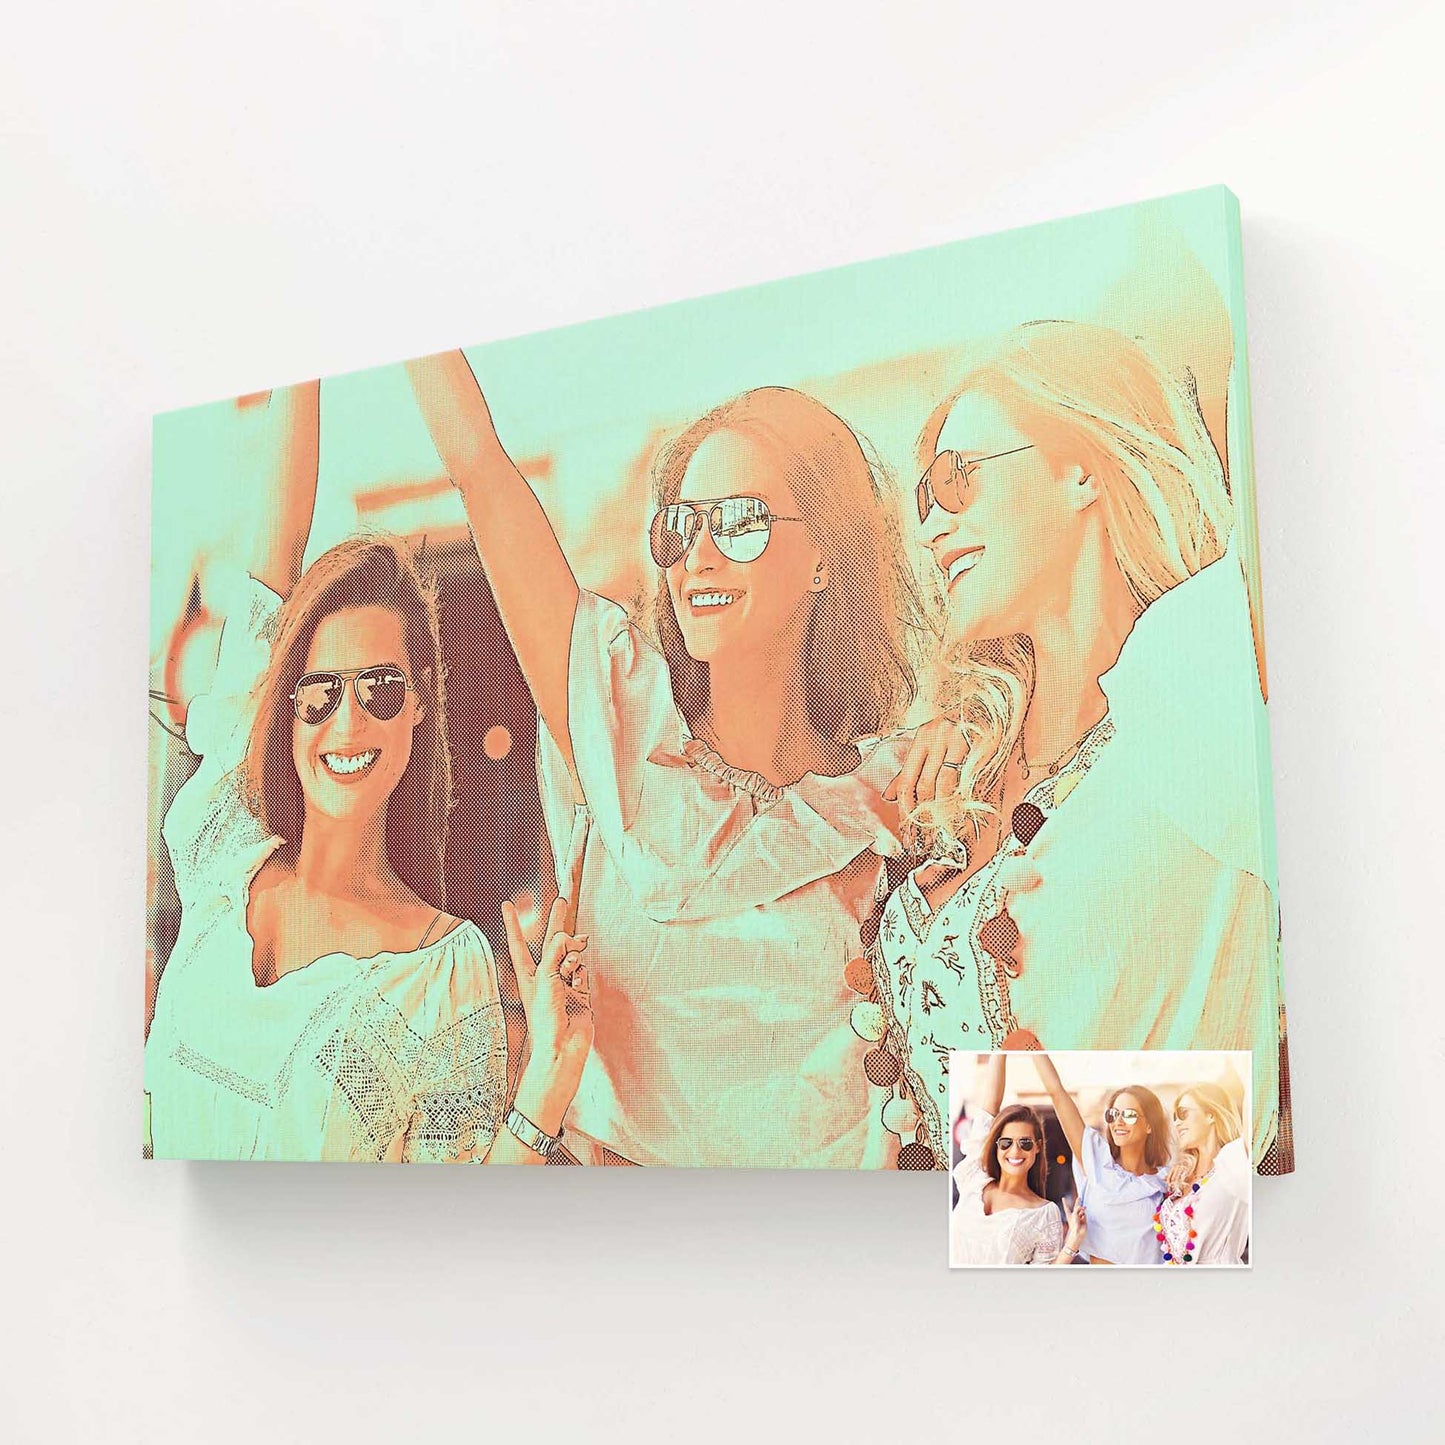 Capture your cherished memories with the Personalised Orange and Green Canvas. This stunning artwork is created from your favorite photo, printed on handmade woven canvas. The vibrant colors evoke a sense of energy and excitement